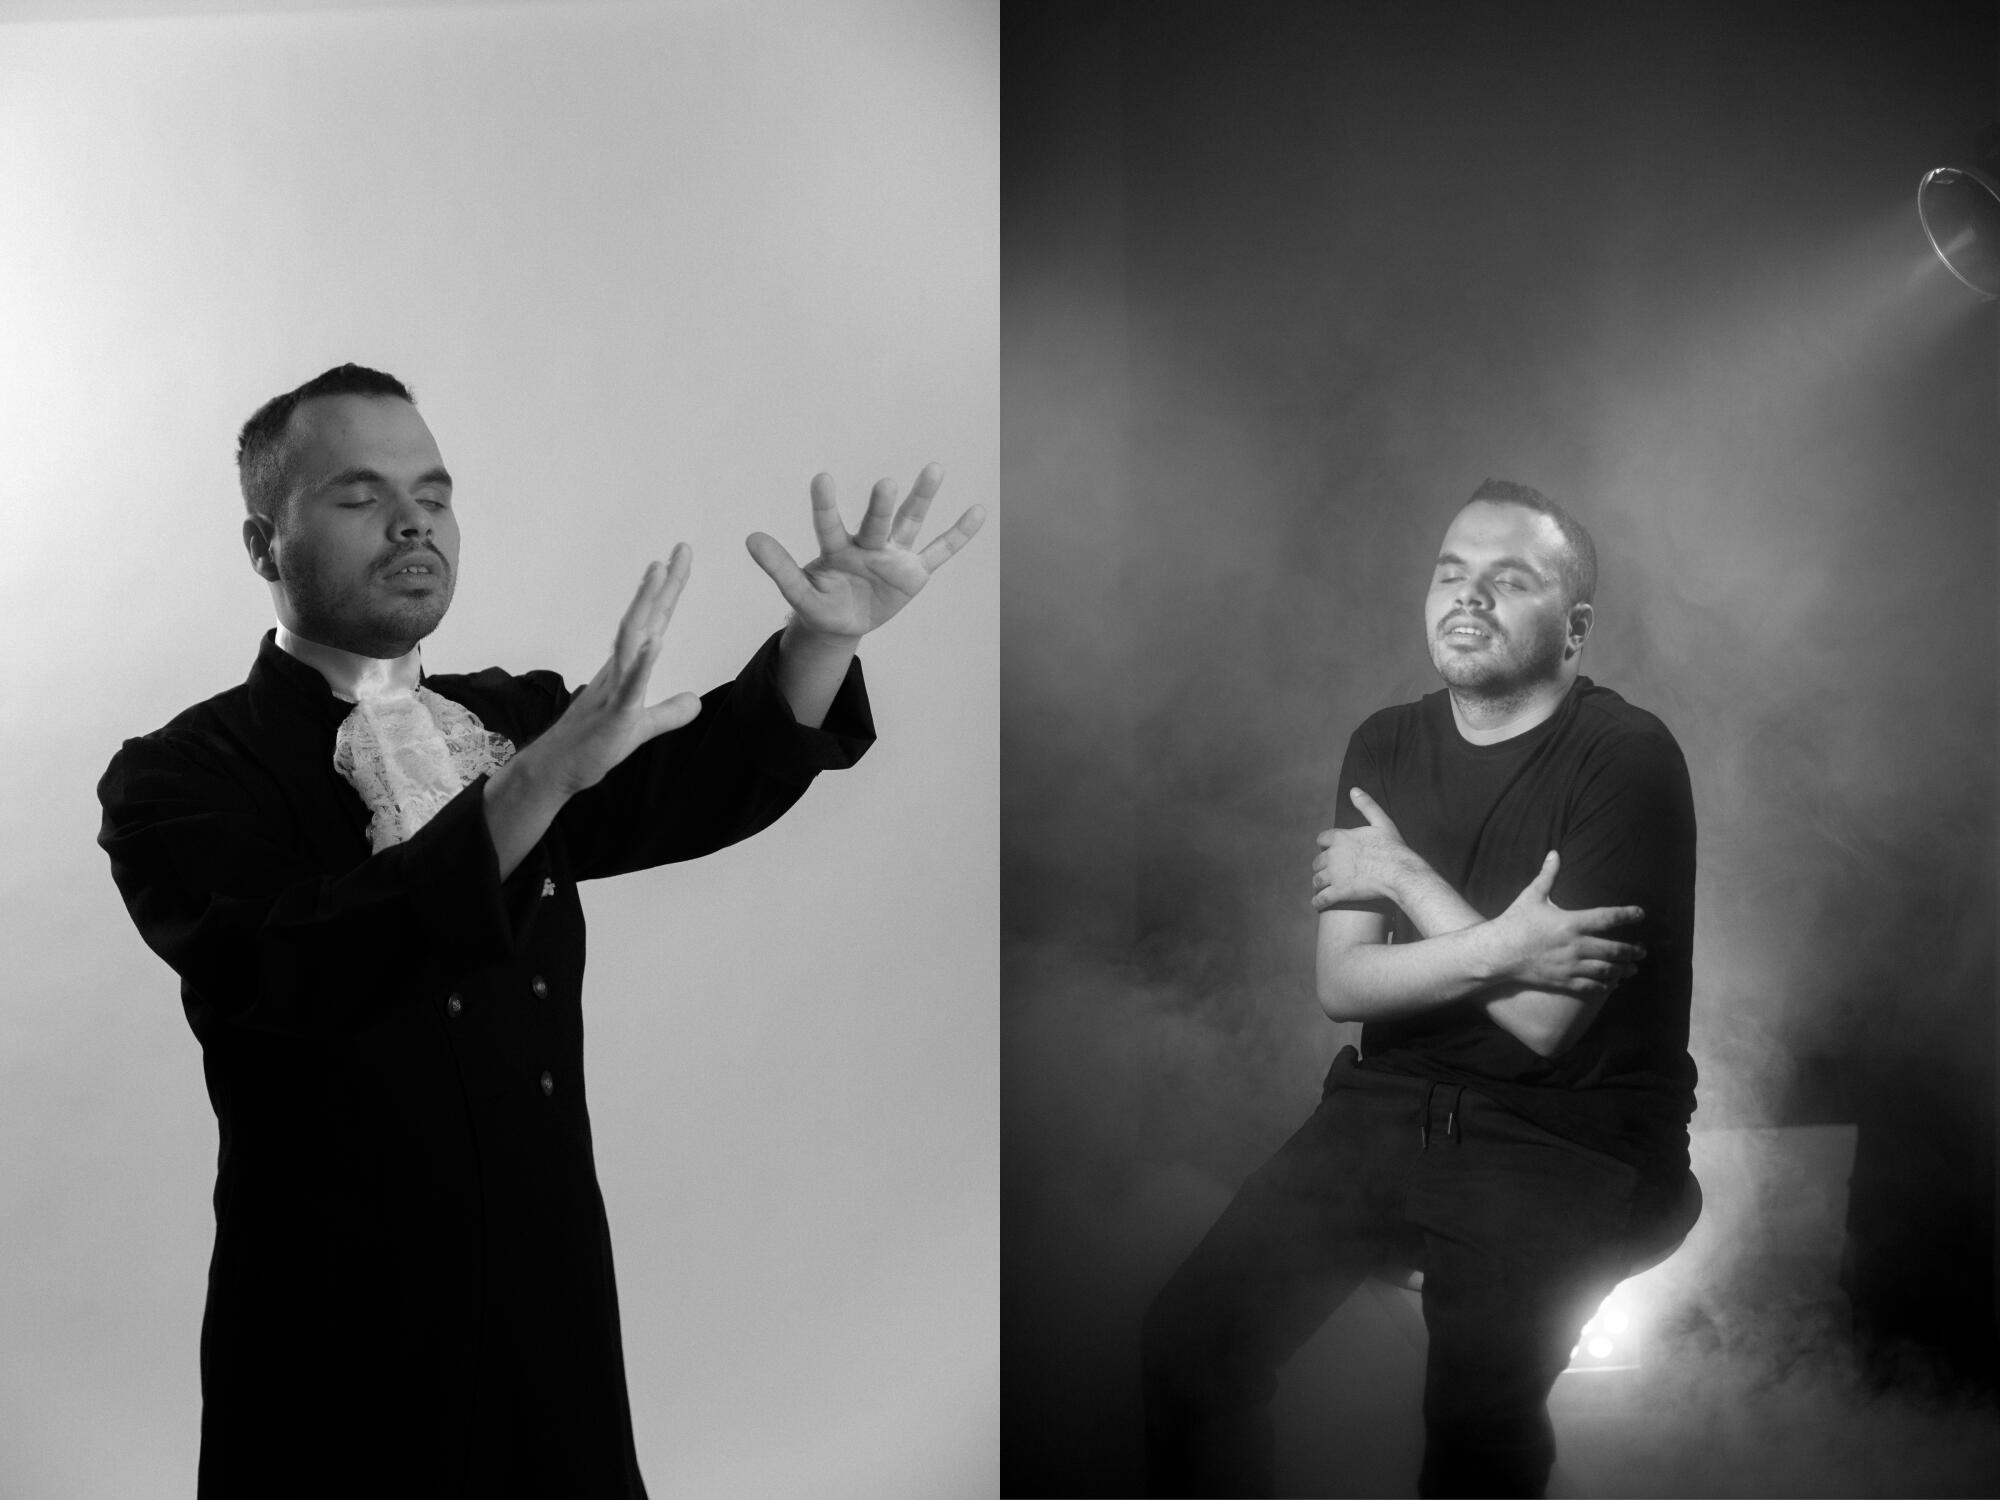 A split image shows a man in costume reaching out his hands, left, and crossing his arms in a cloud of mist, right.